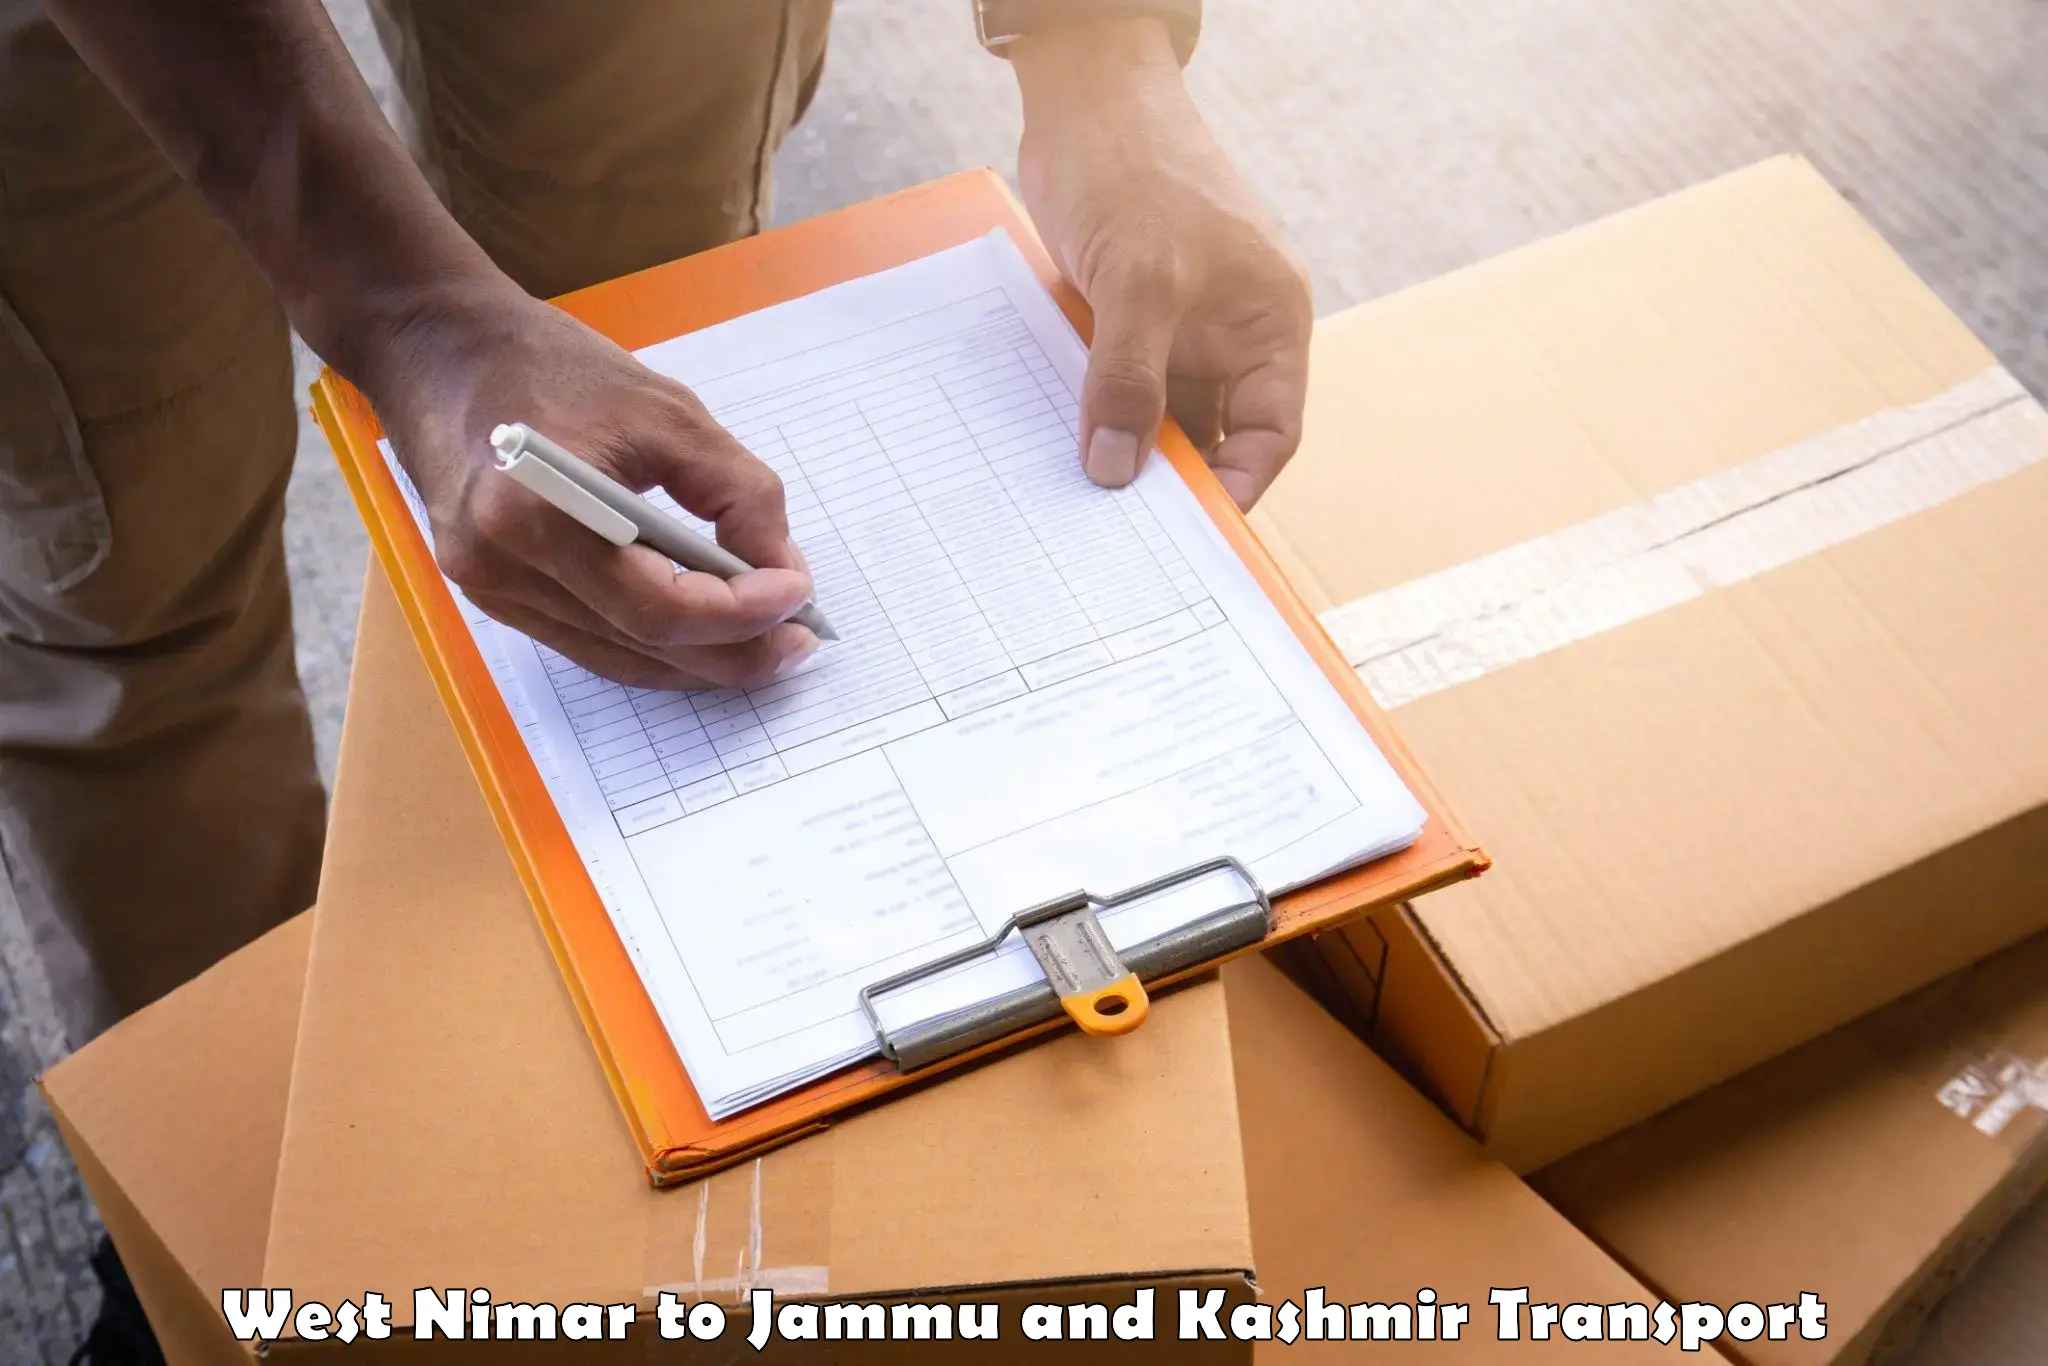 Truck transport companies in India West Nimar to Katra